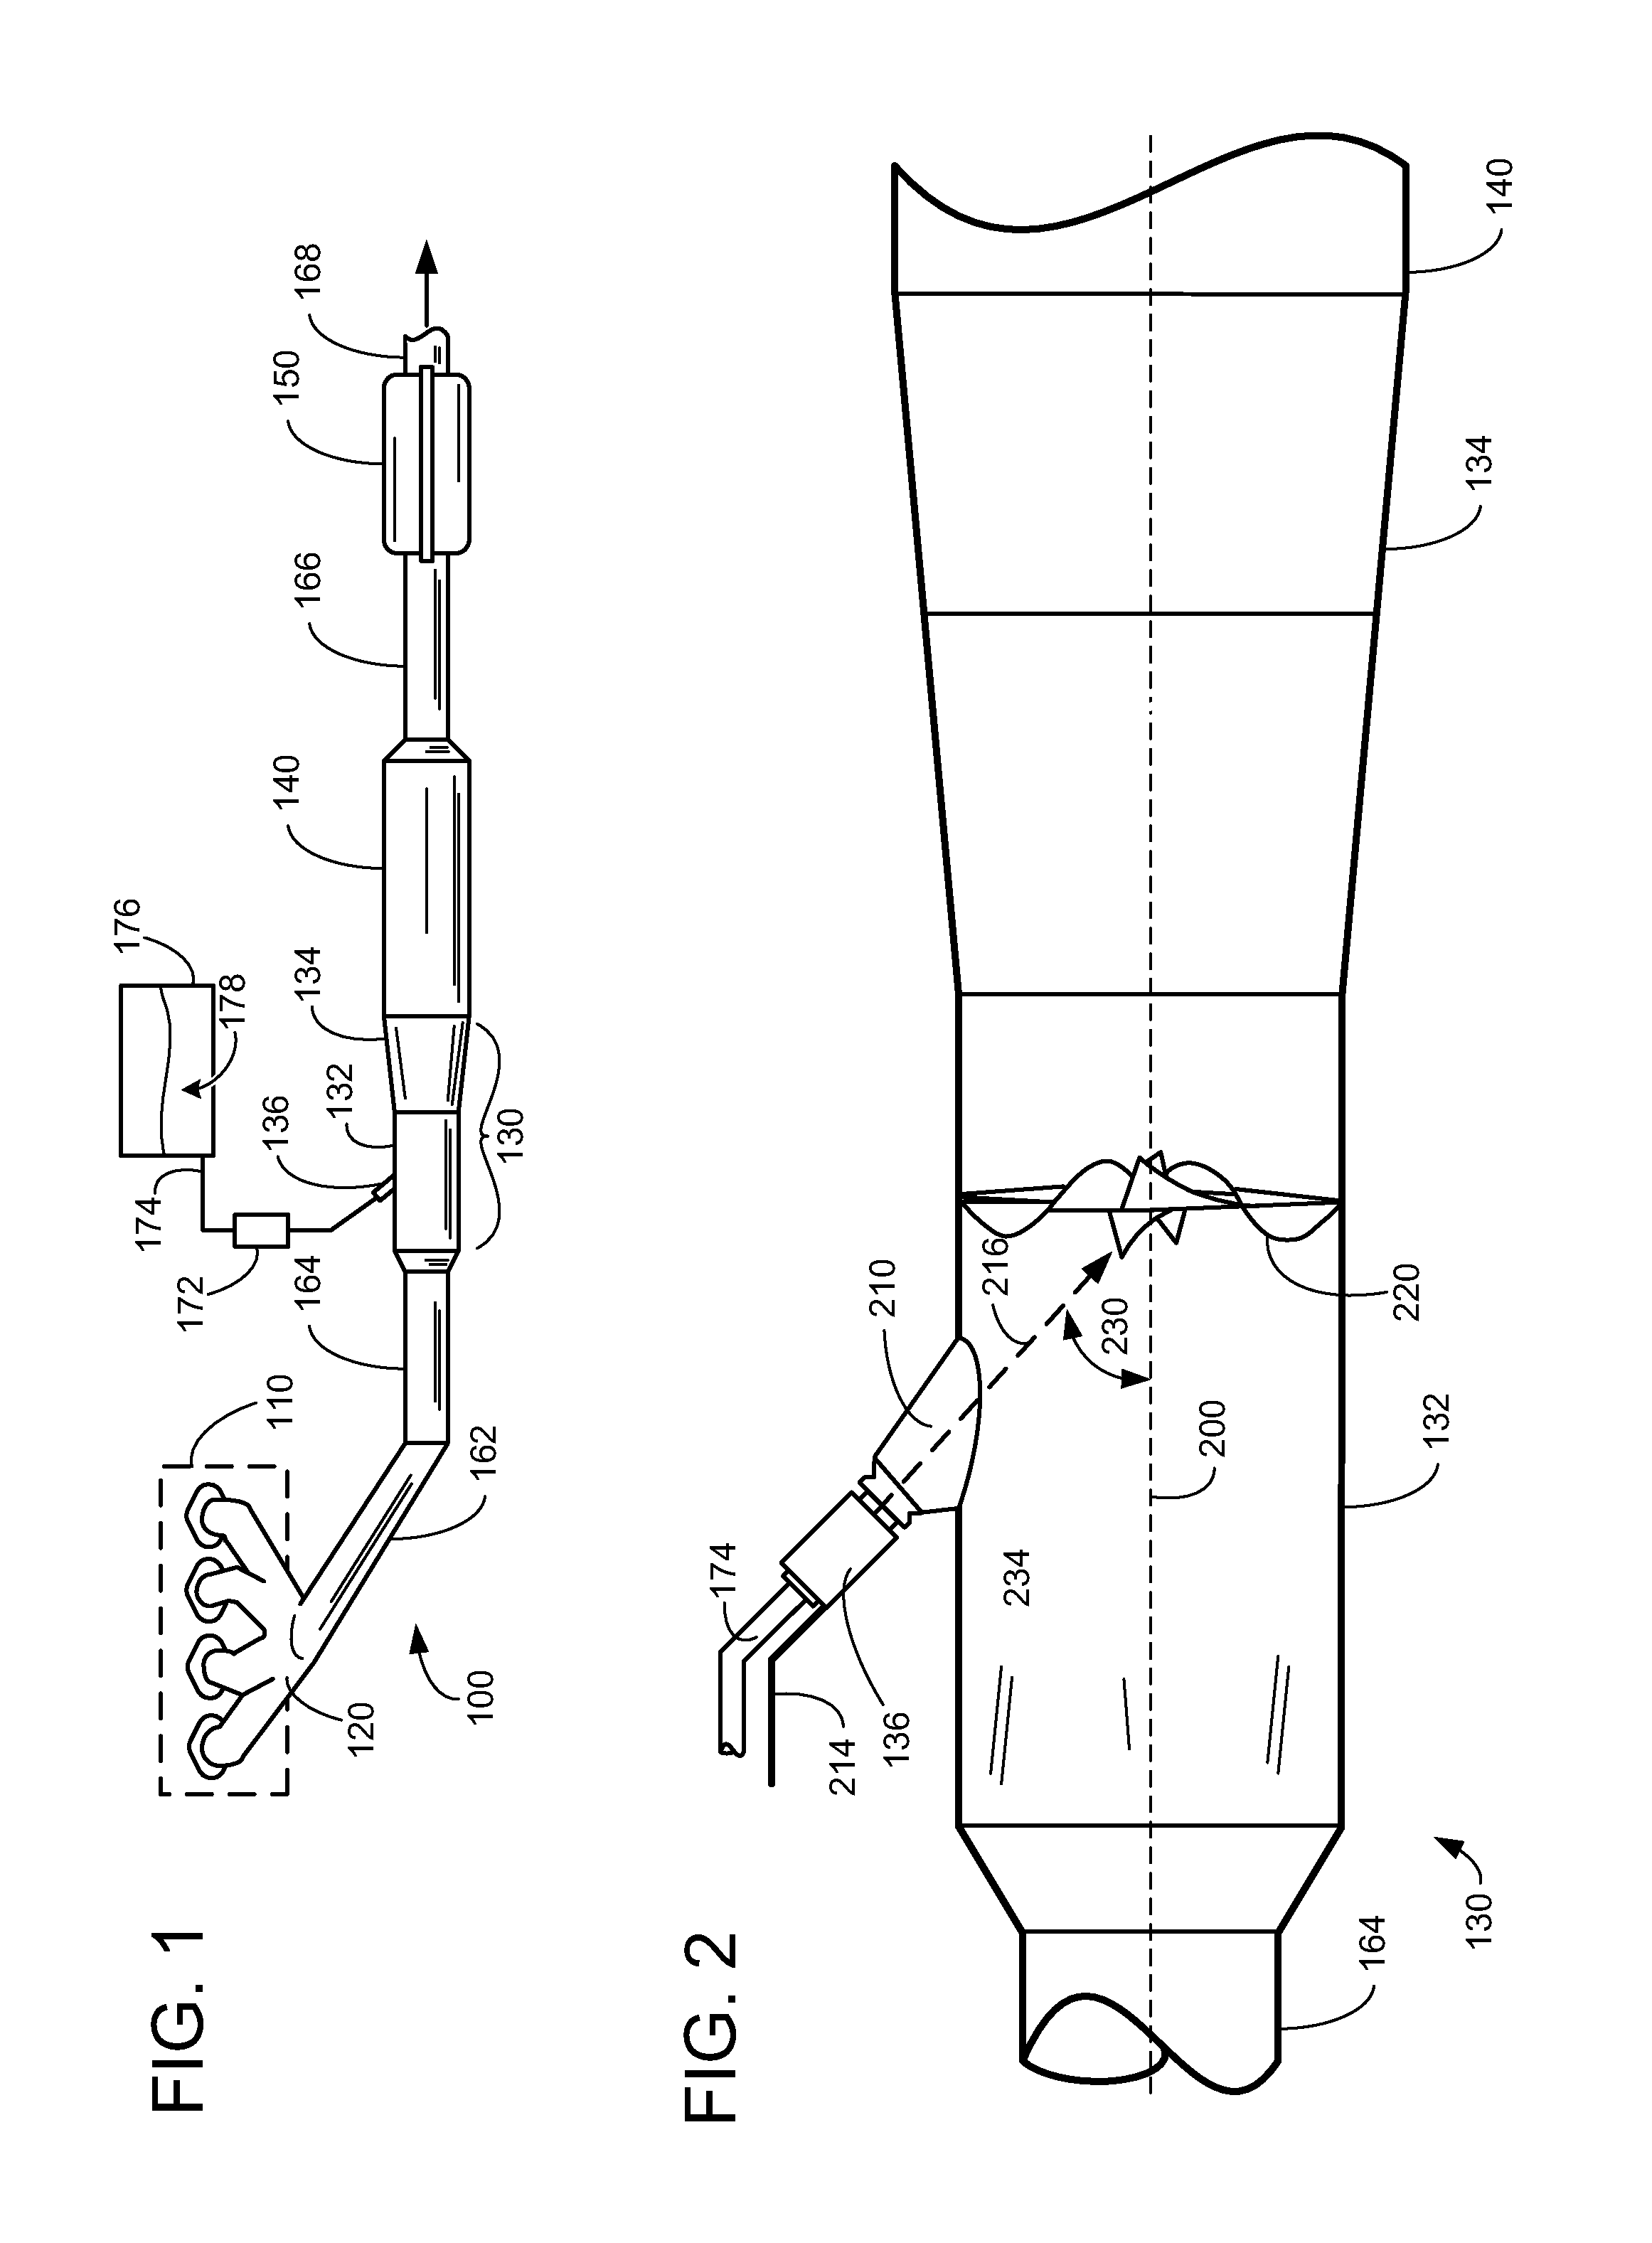 Exhaust system mixing device